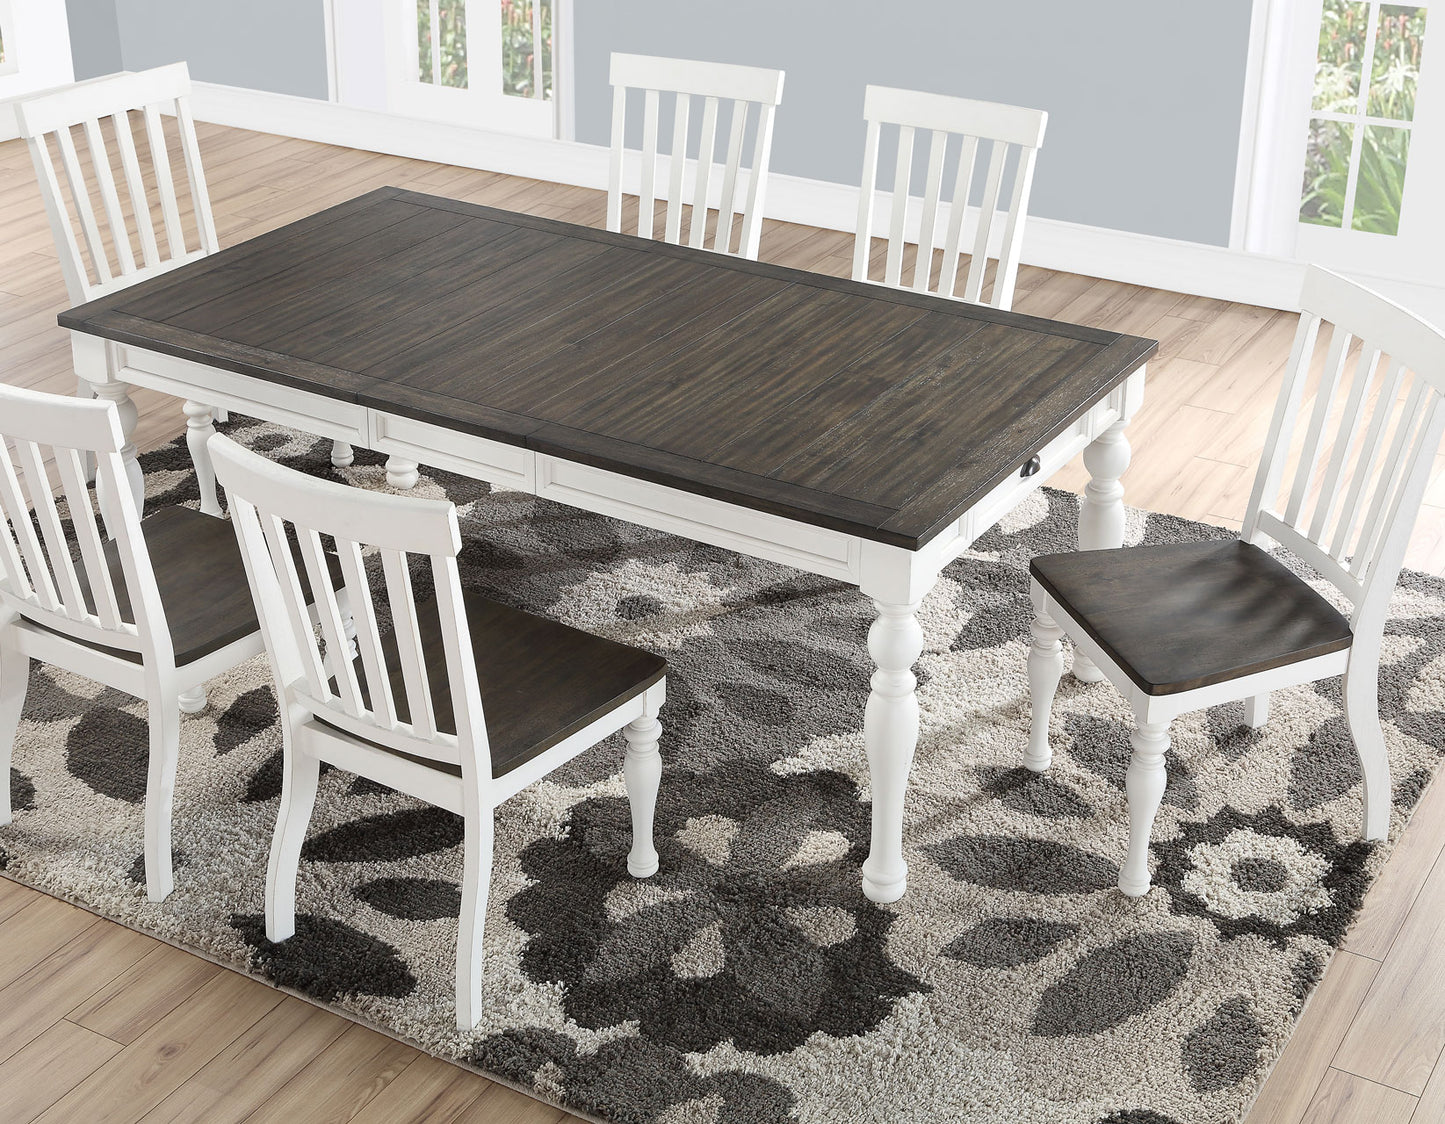 Joanna 6 Piece Dining
(Table, Bench & 4 Side Chairs)